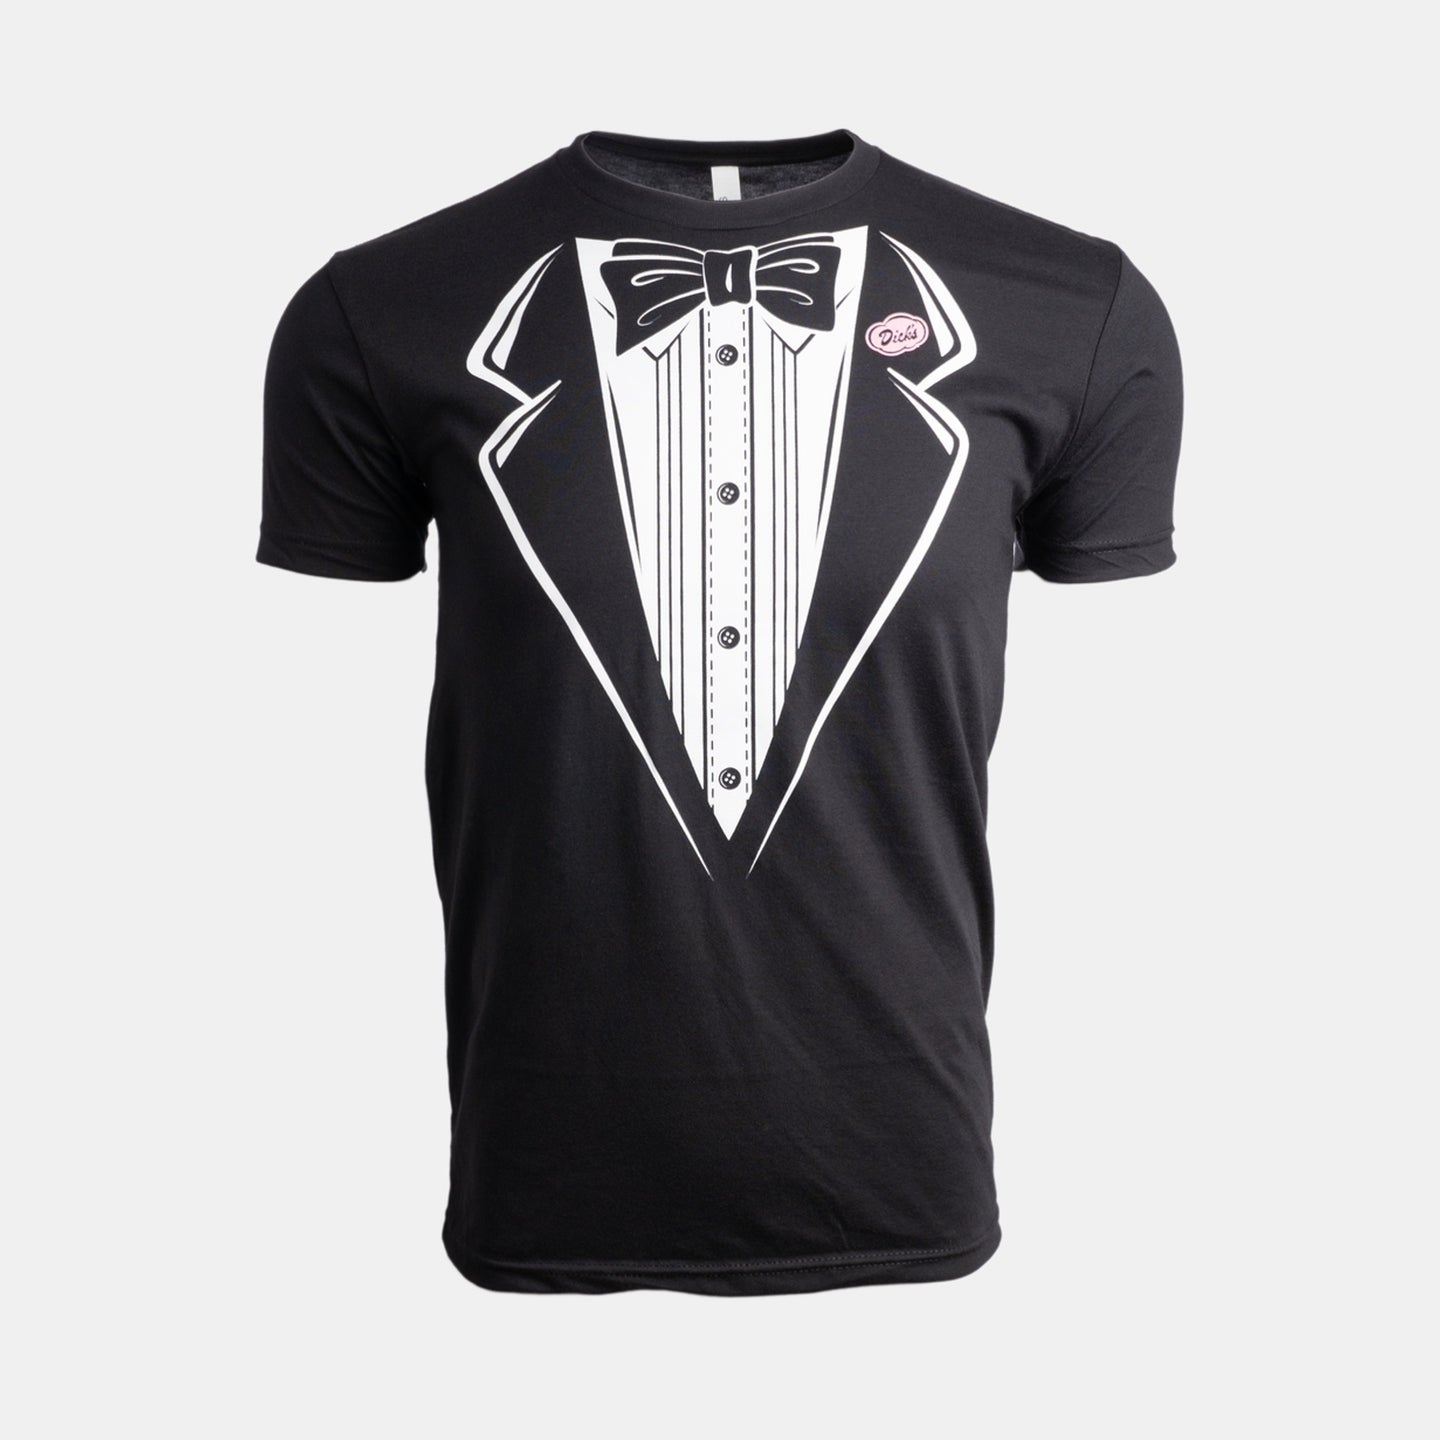 Black t-shirt with black and white tuxedo graphic on front. Pink Dick's Drive-In cloud logo on left 